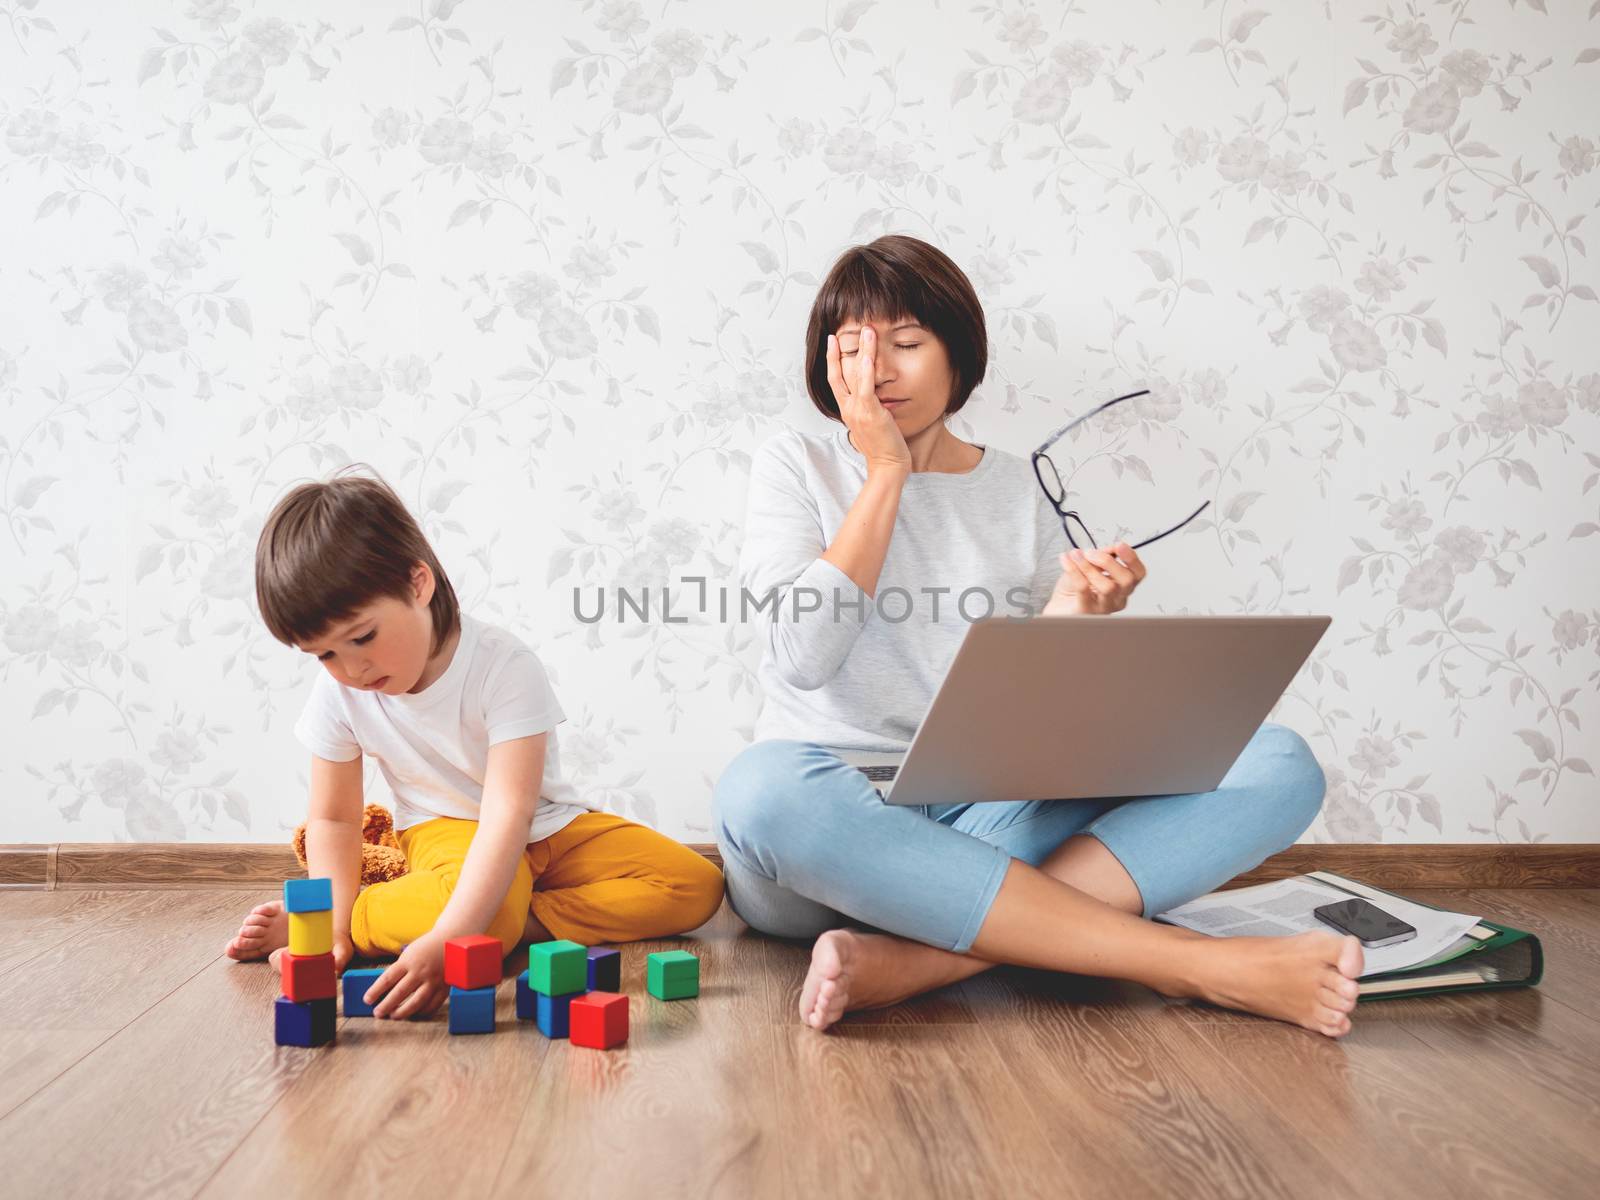 Mom and son sit at home quarantine because of coronavirus COVID19. Tired mother works remotely with laptop, son plays with toy blocks. Self isolation at home.